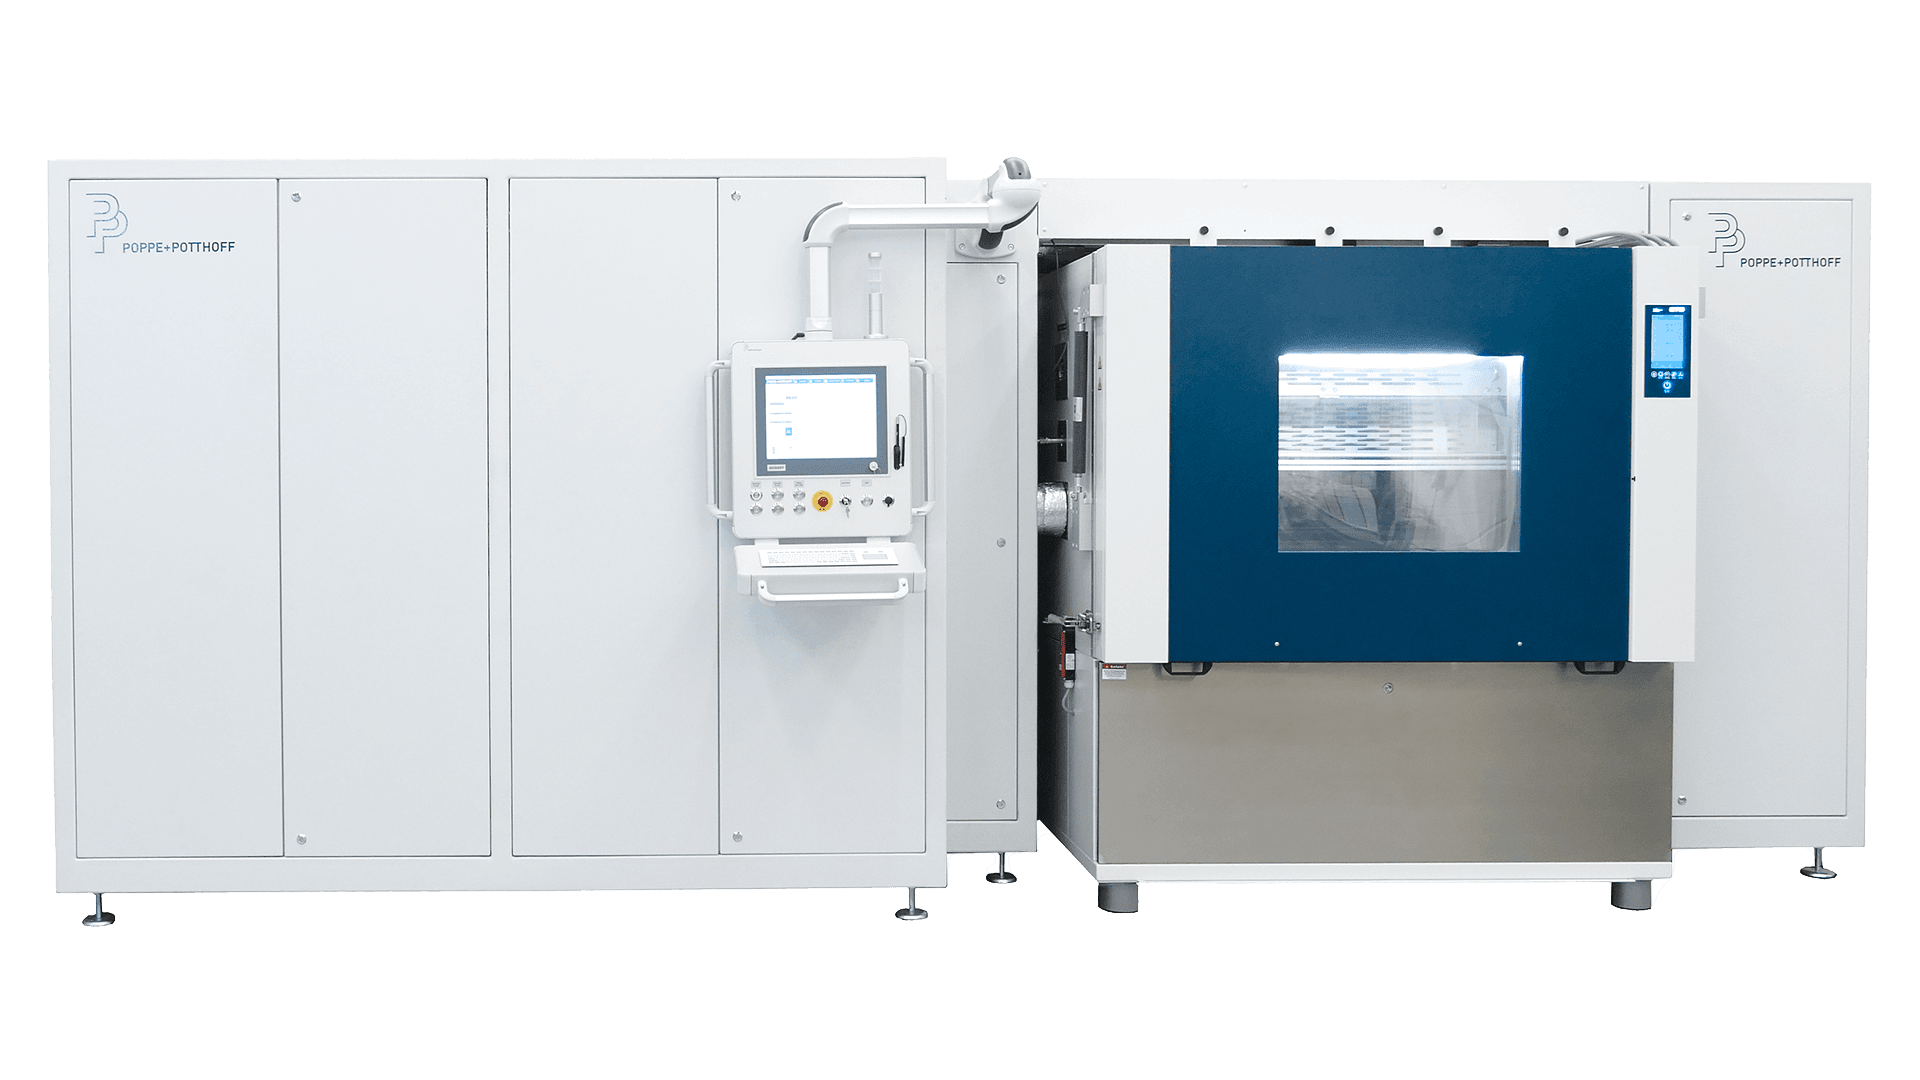 M07 coolant circuit pressure cycle test rig with cooling and heating system, environmental test chamber and operating PC by Poppe + Potthoff Maschinenbau